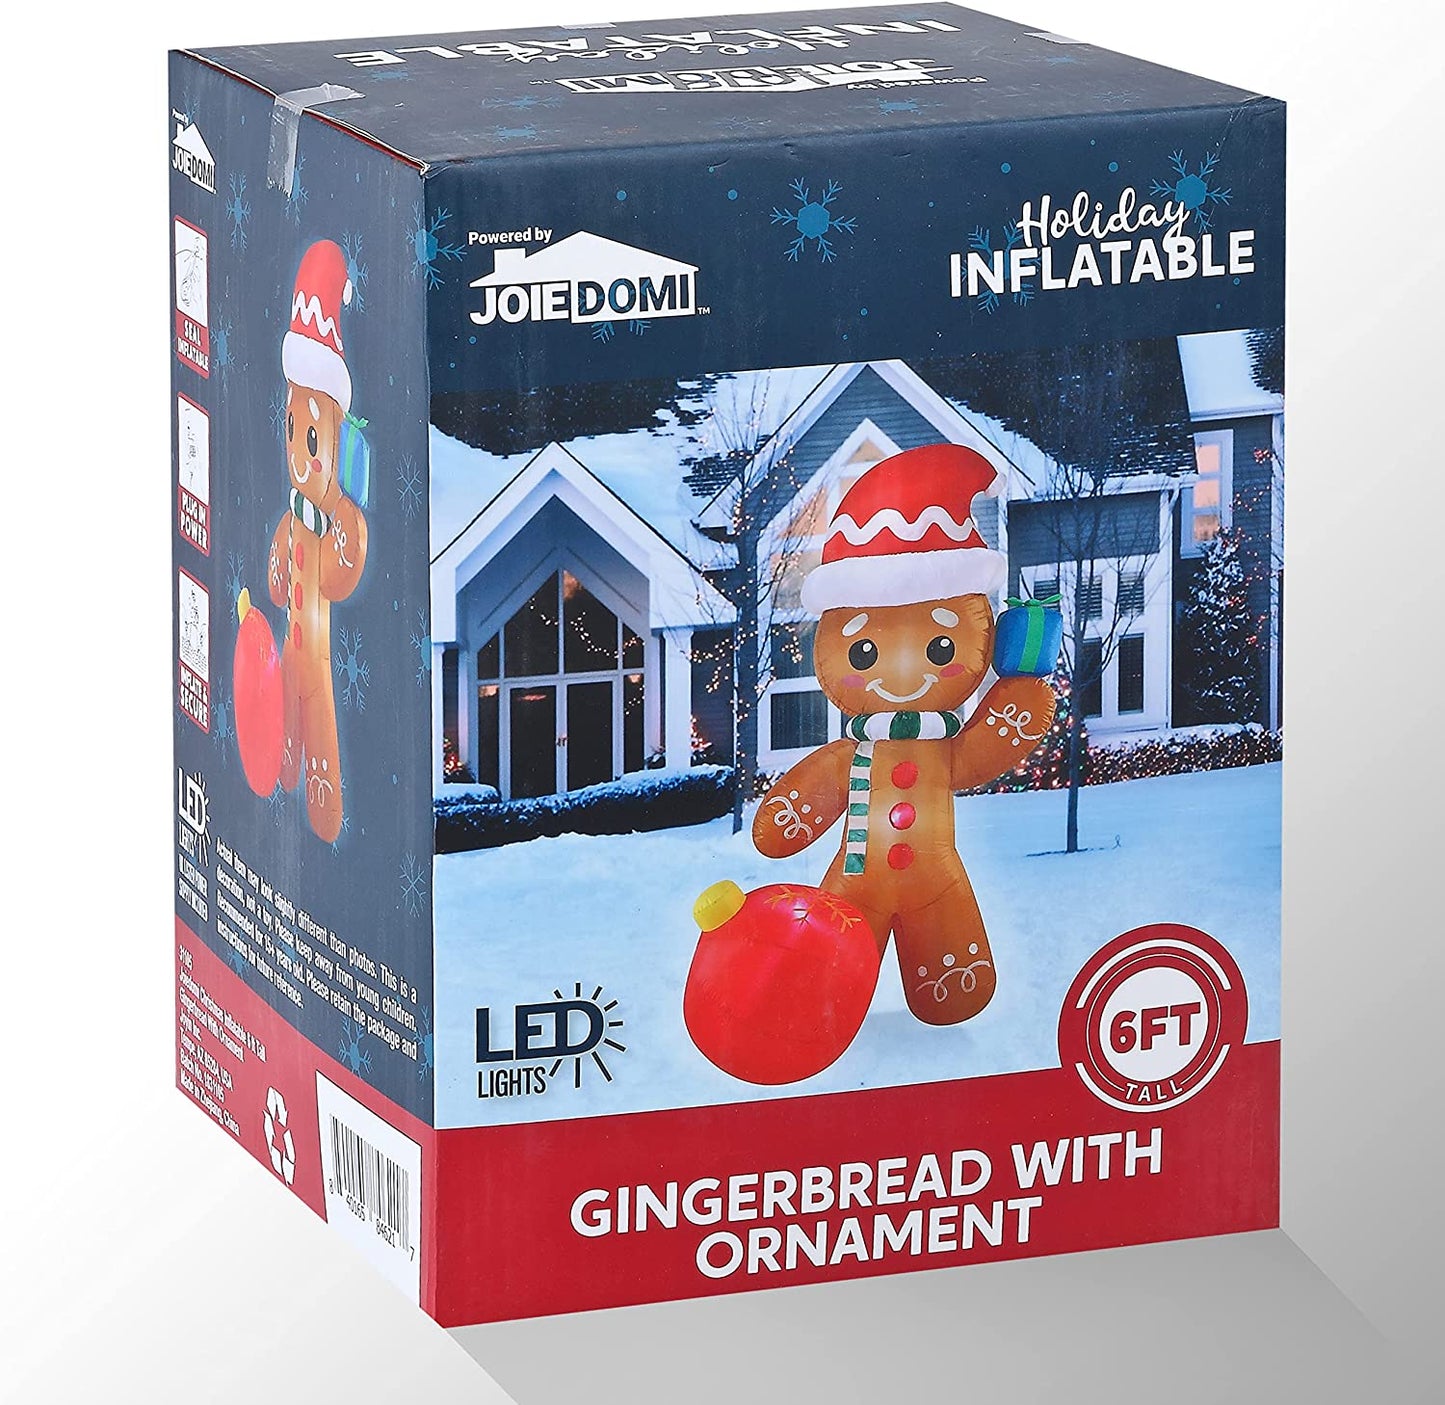 6 FT Tall Inflatable Gingerbread with Ornament Christmas Inflatable with Build-in LEDs